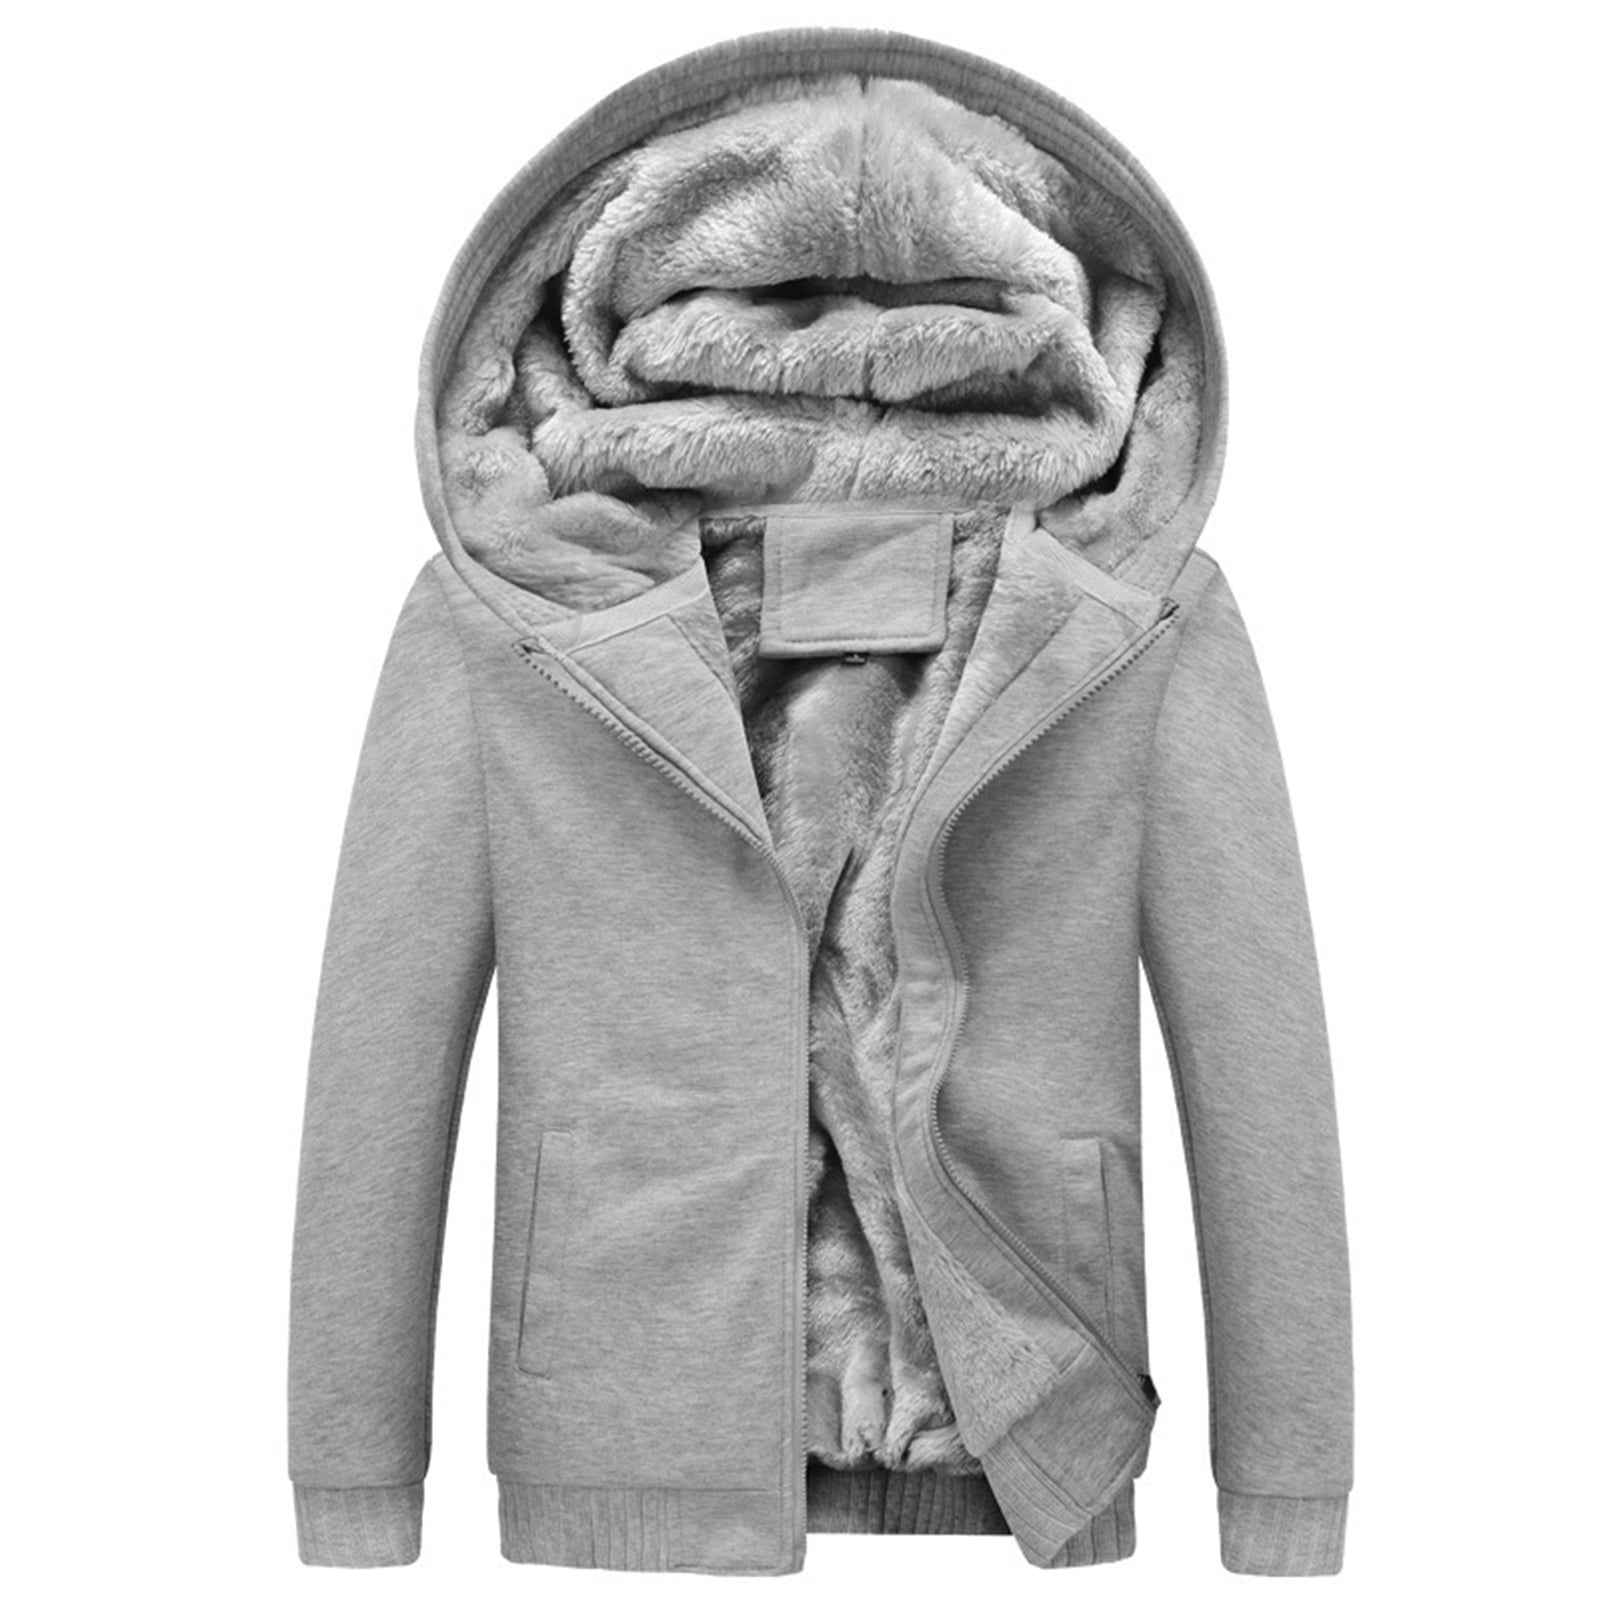 SR New Mens Hoodie with Fleece Lining and Front Pocket Solid Color Warm Thick Sweatshirt Pullover Hooded Winter Jacket